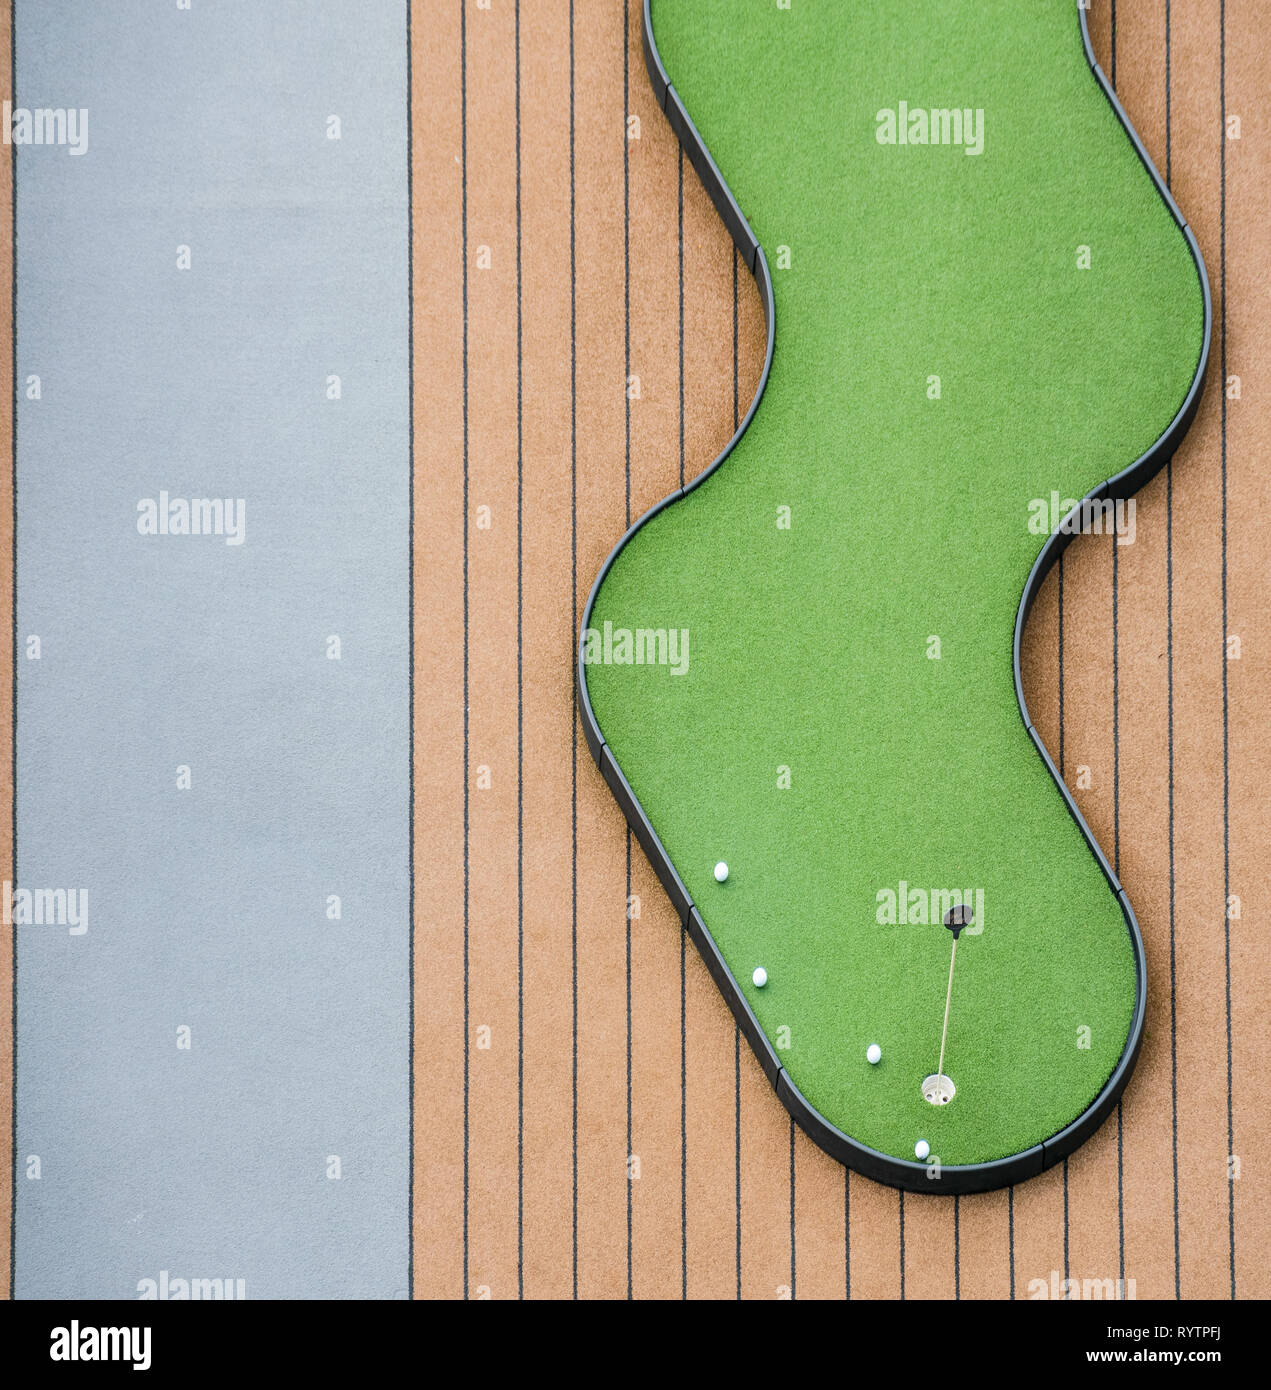 Abstract view of Games on board of a cruise ship miniature golf, shuffle board and chairs, Stock Photo